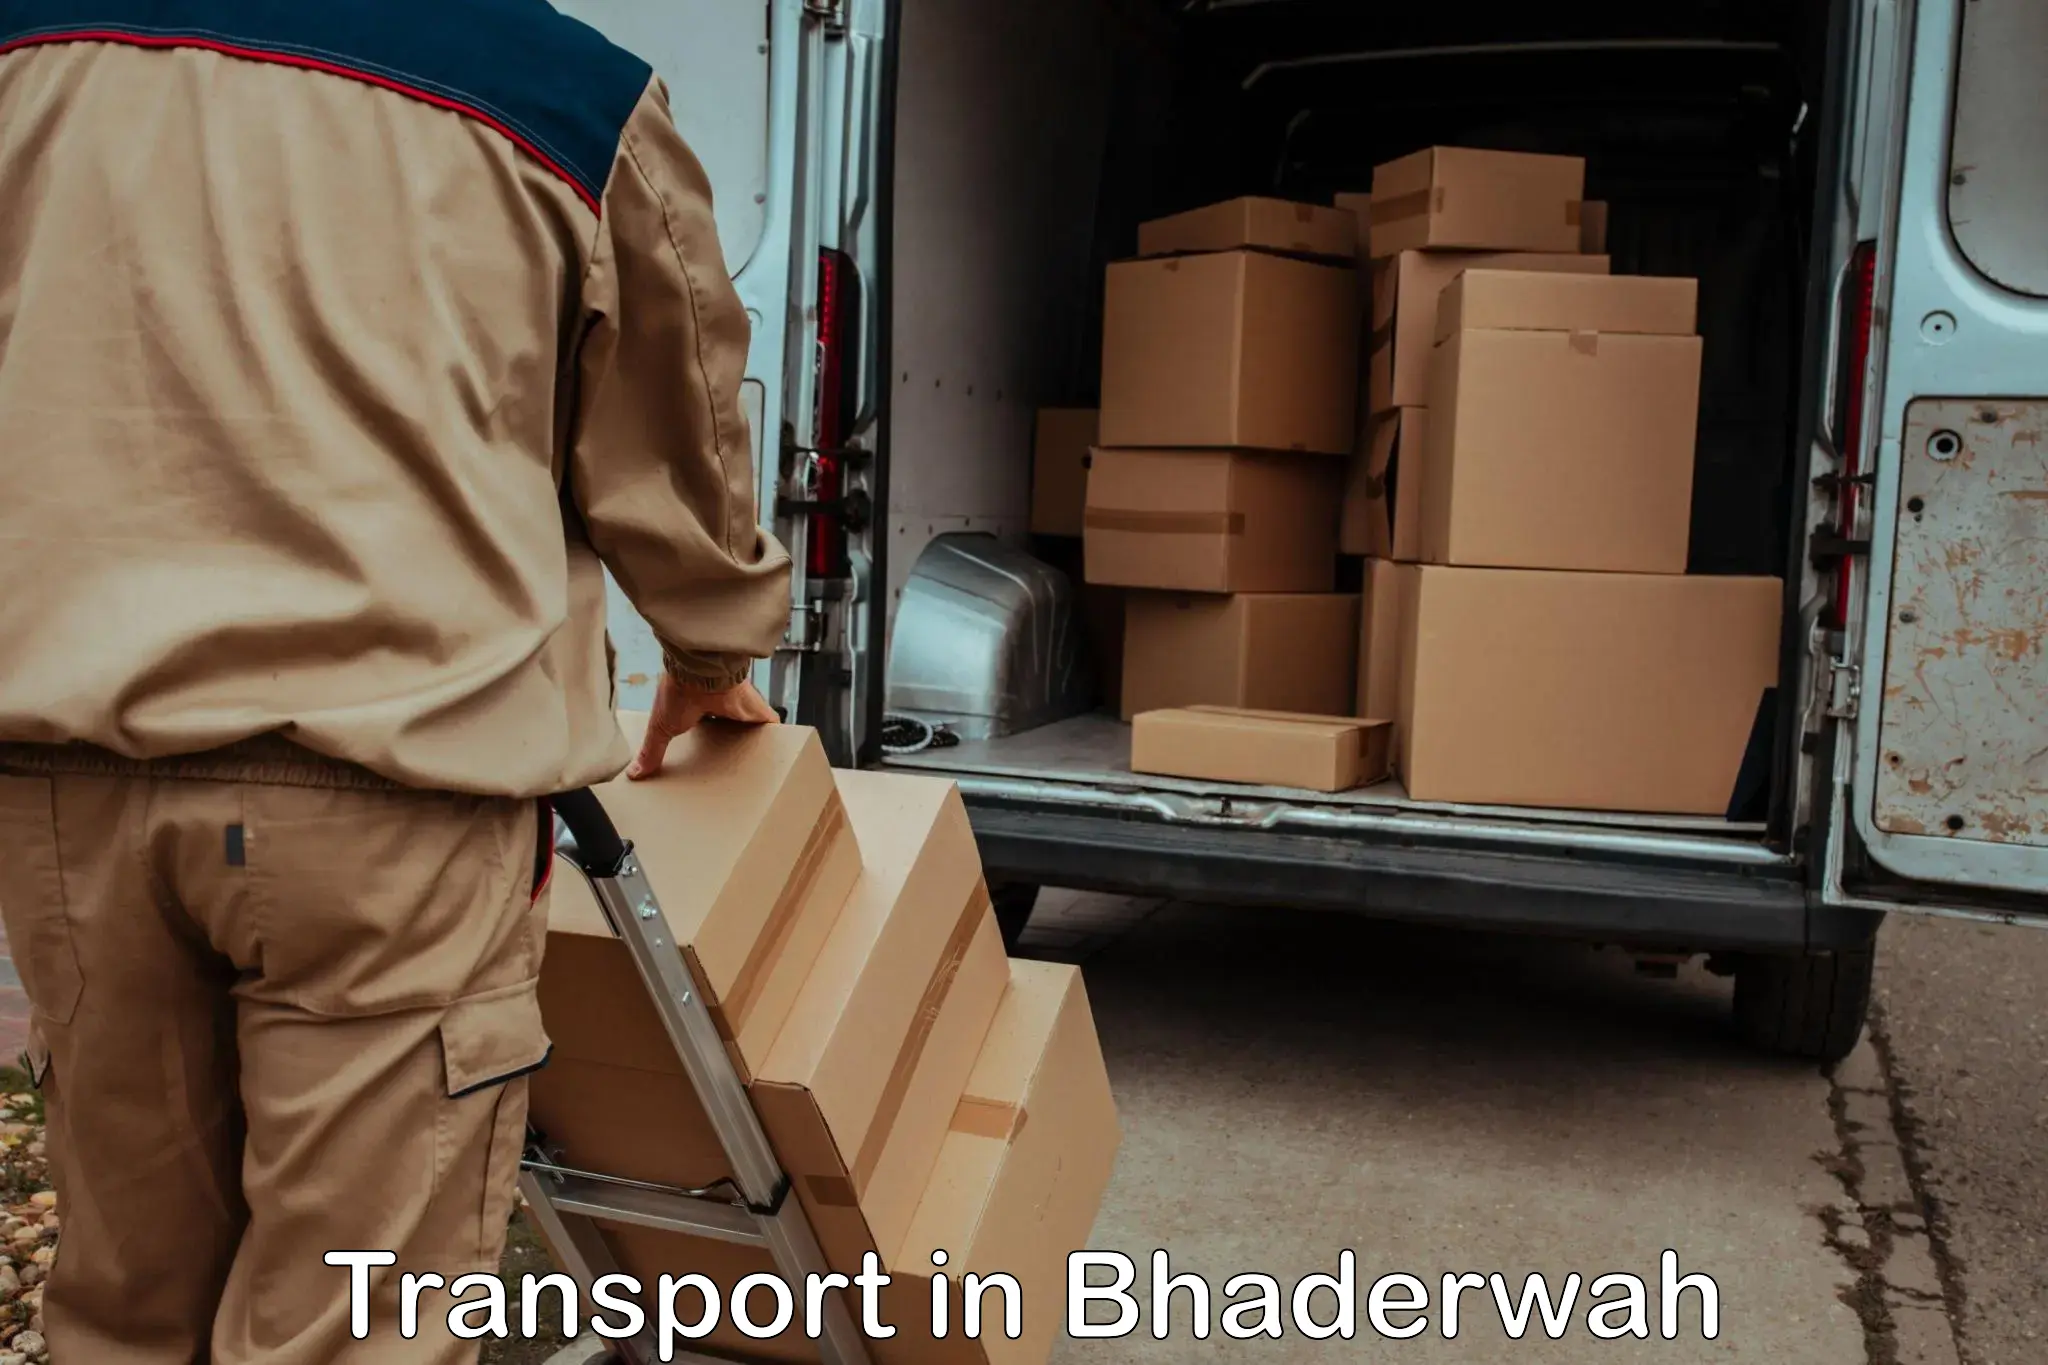 Pick up transport service in Bhaderwah